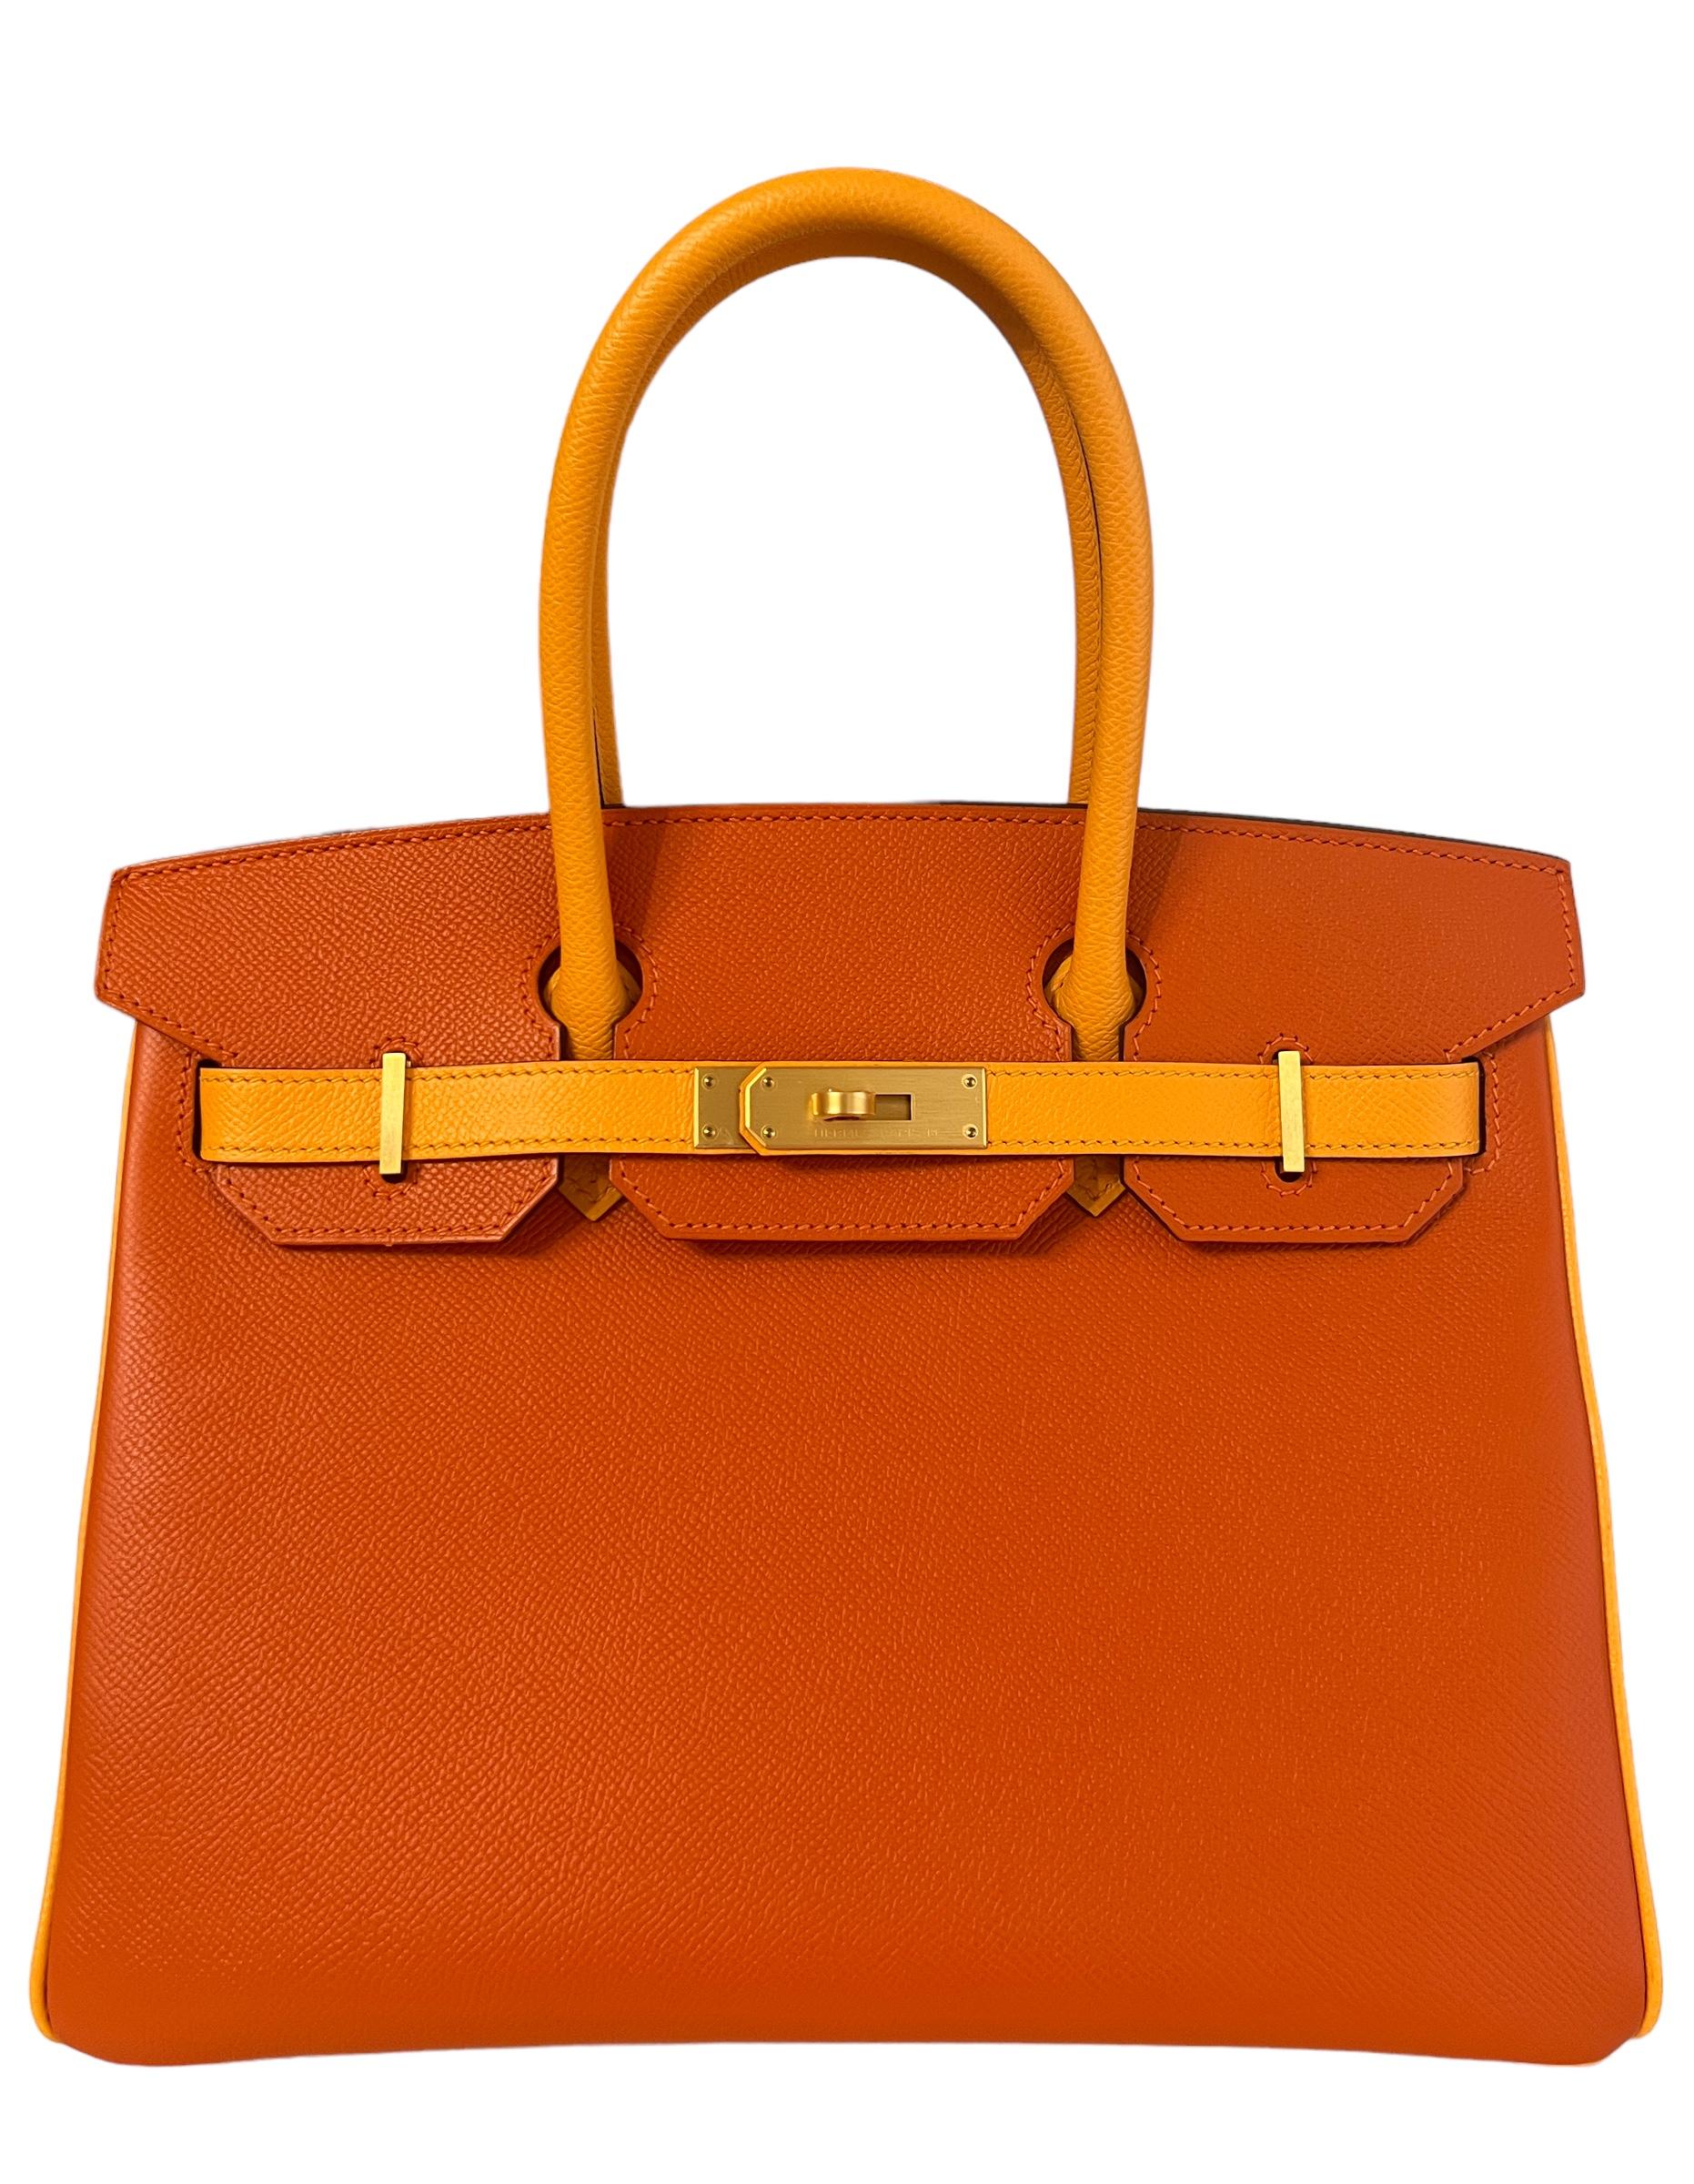 Stunning As New 1 of 1 HSS Special Order Hermes Birkin 30 Feu Orange Jaune D'or Yellow Epsom Leather complimented by Brushed Gold Hardware. As new with Plastic on all Hardware and Feet. From Collectors closet. D Stamp 2019.

Shop with confidence